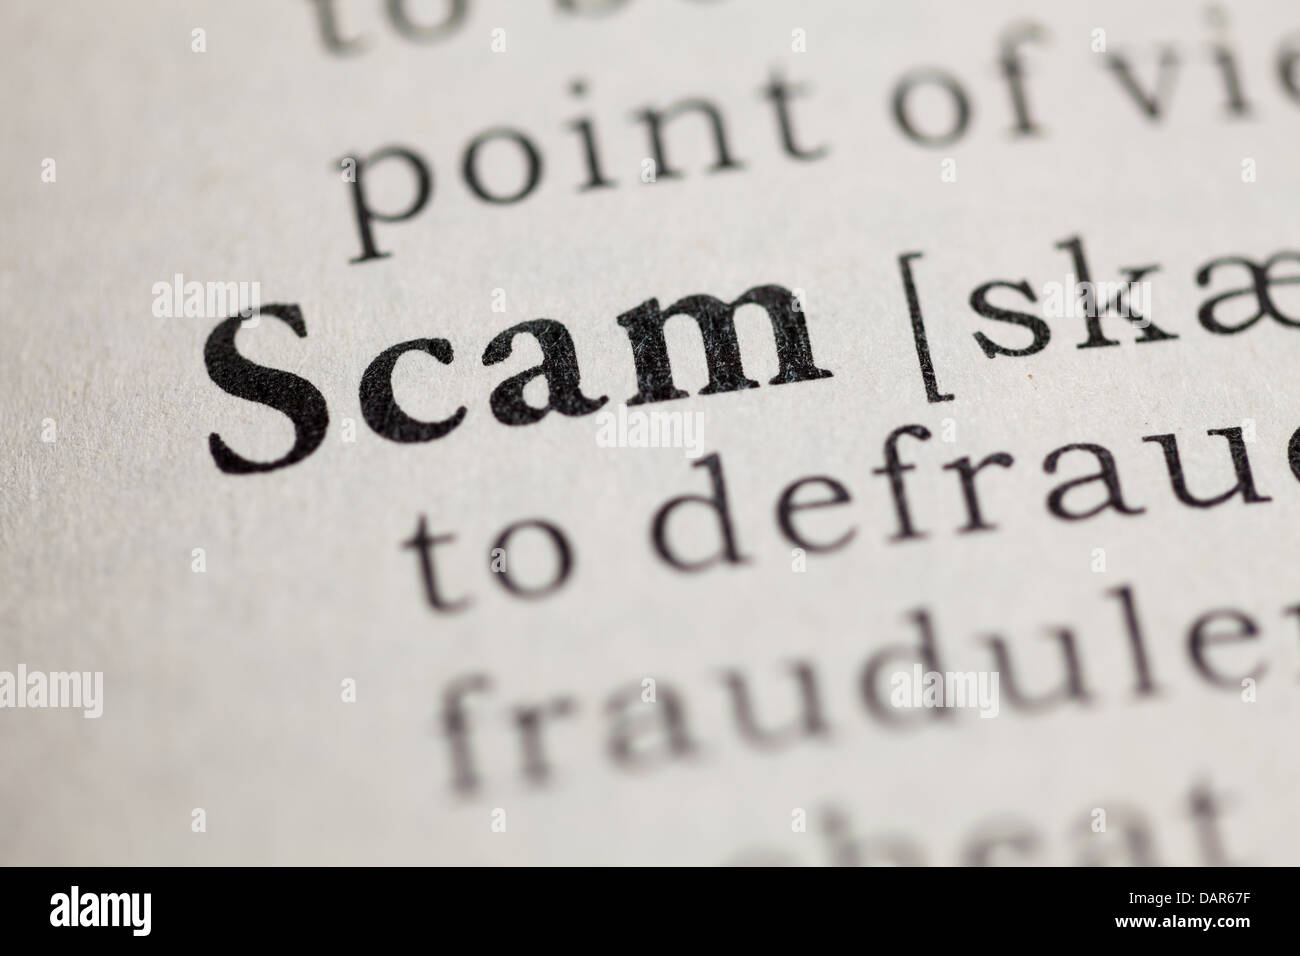 Fake Dictionary, Dictionary definition of the word Scam. Stock Photo